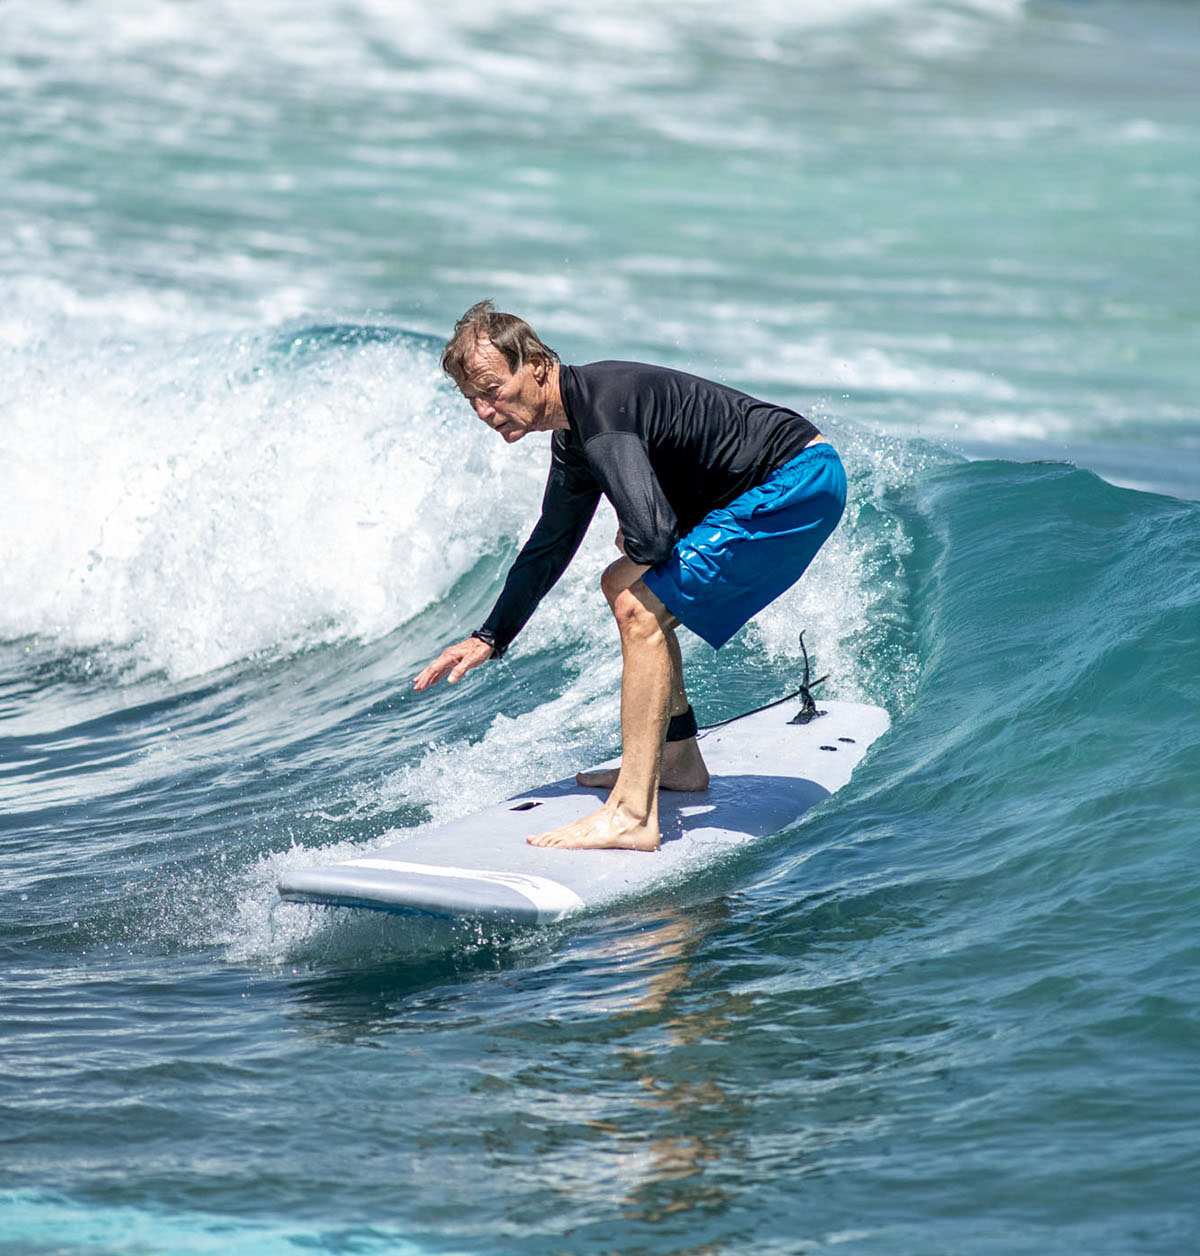 A man in swimwear rides a surfboard on a large blue wave